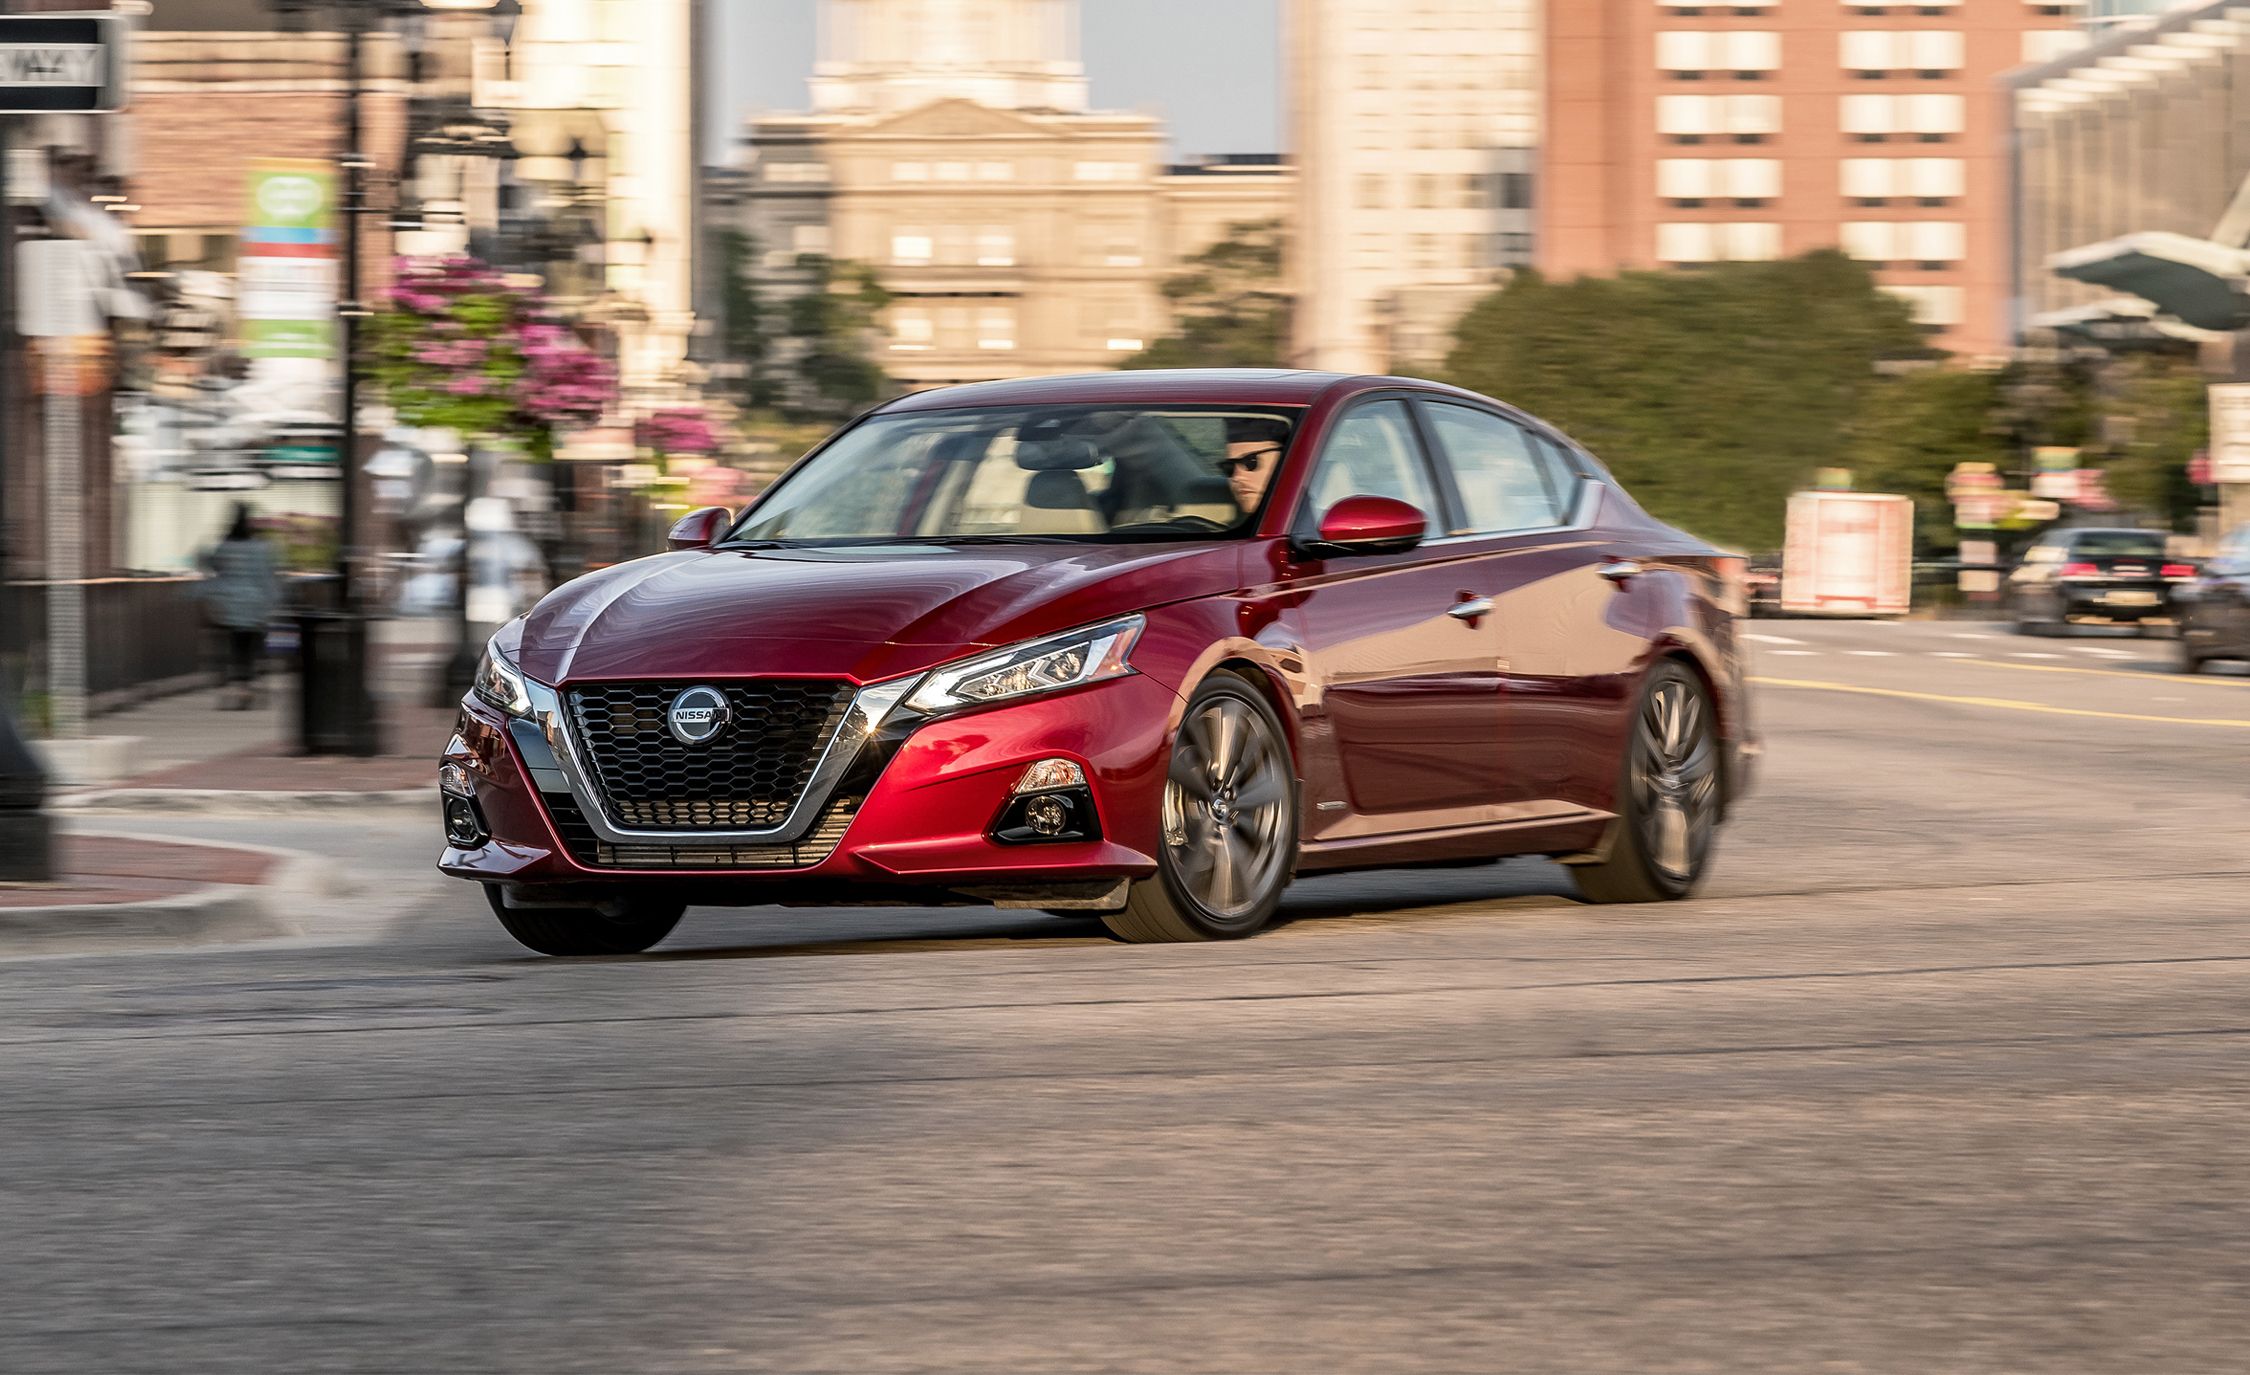 58 HQ Images Nissan Altima Sport Mode - 2019 Nissan Altima photo gallery: Better styling, a trick ...